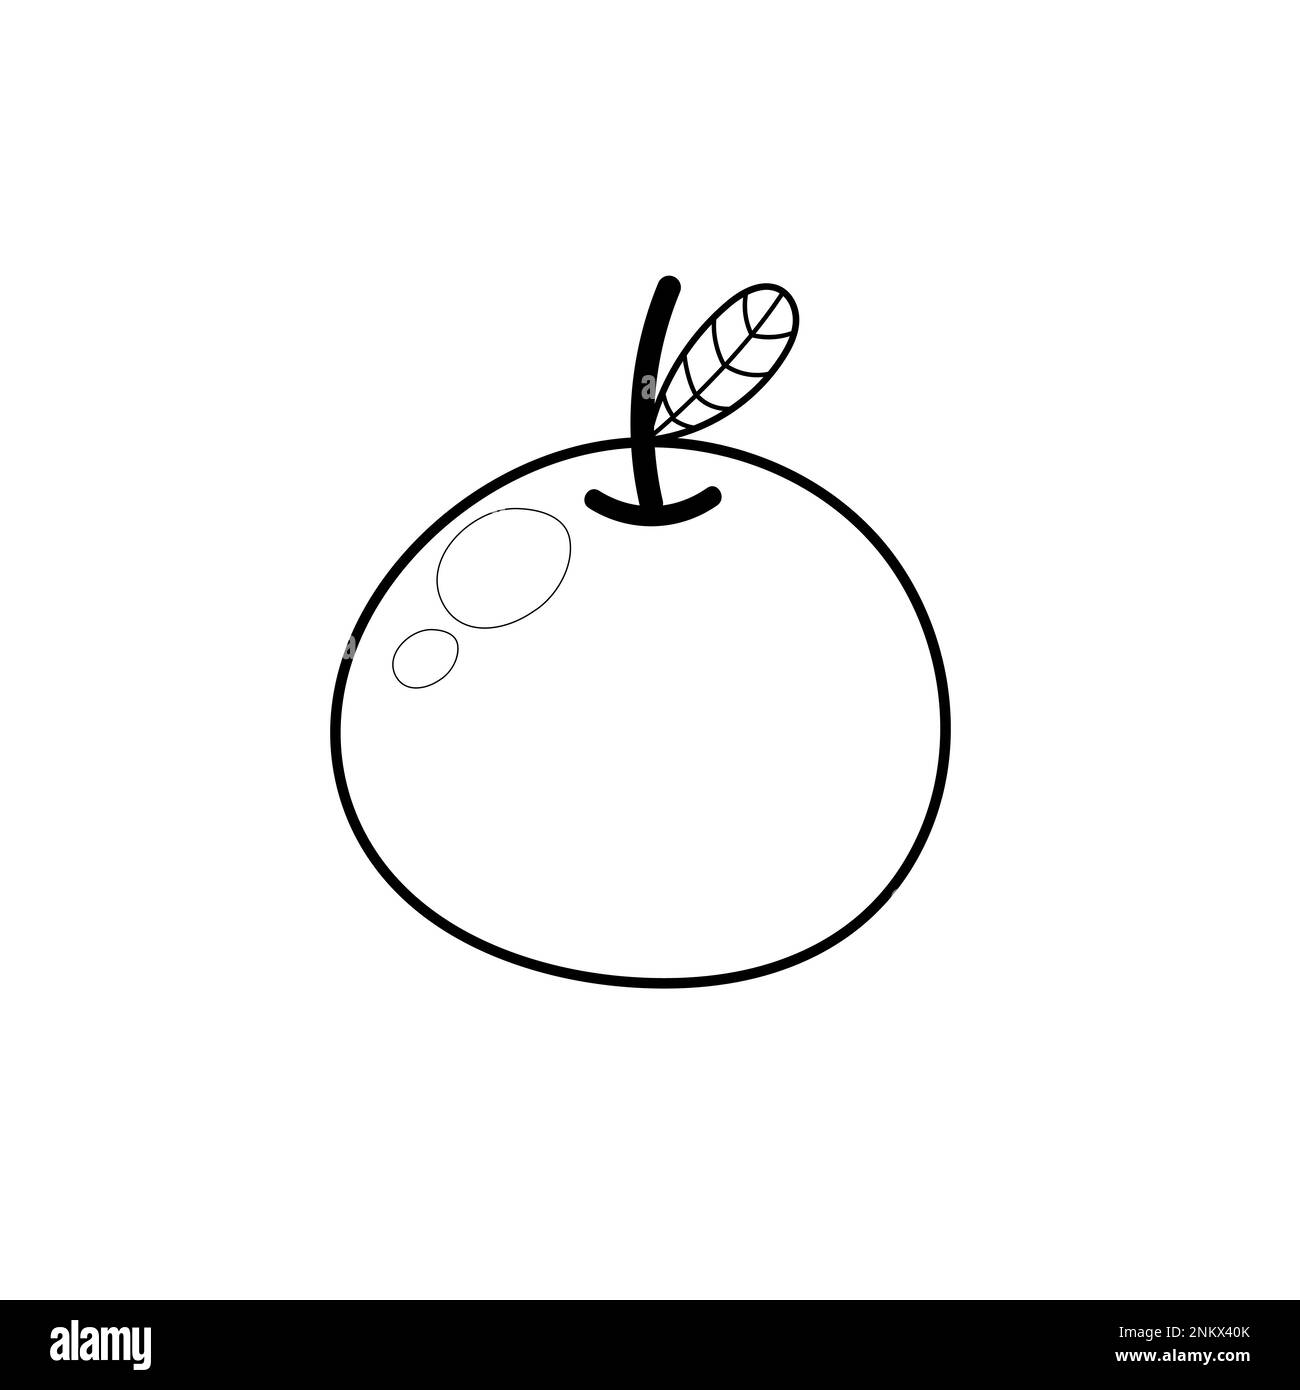 Apple coloring page for adults and kids. Black and white print with fruit Stock Vector